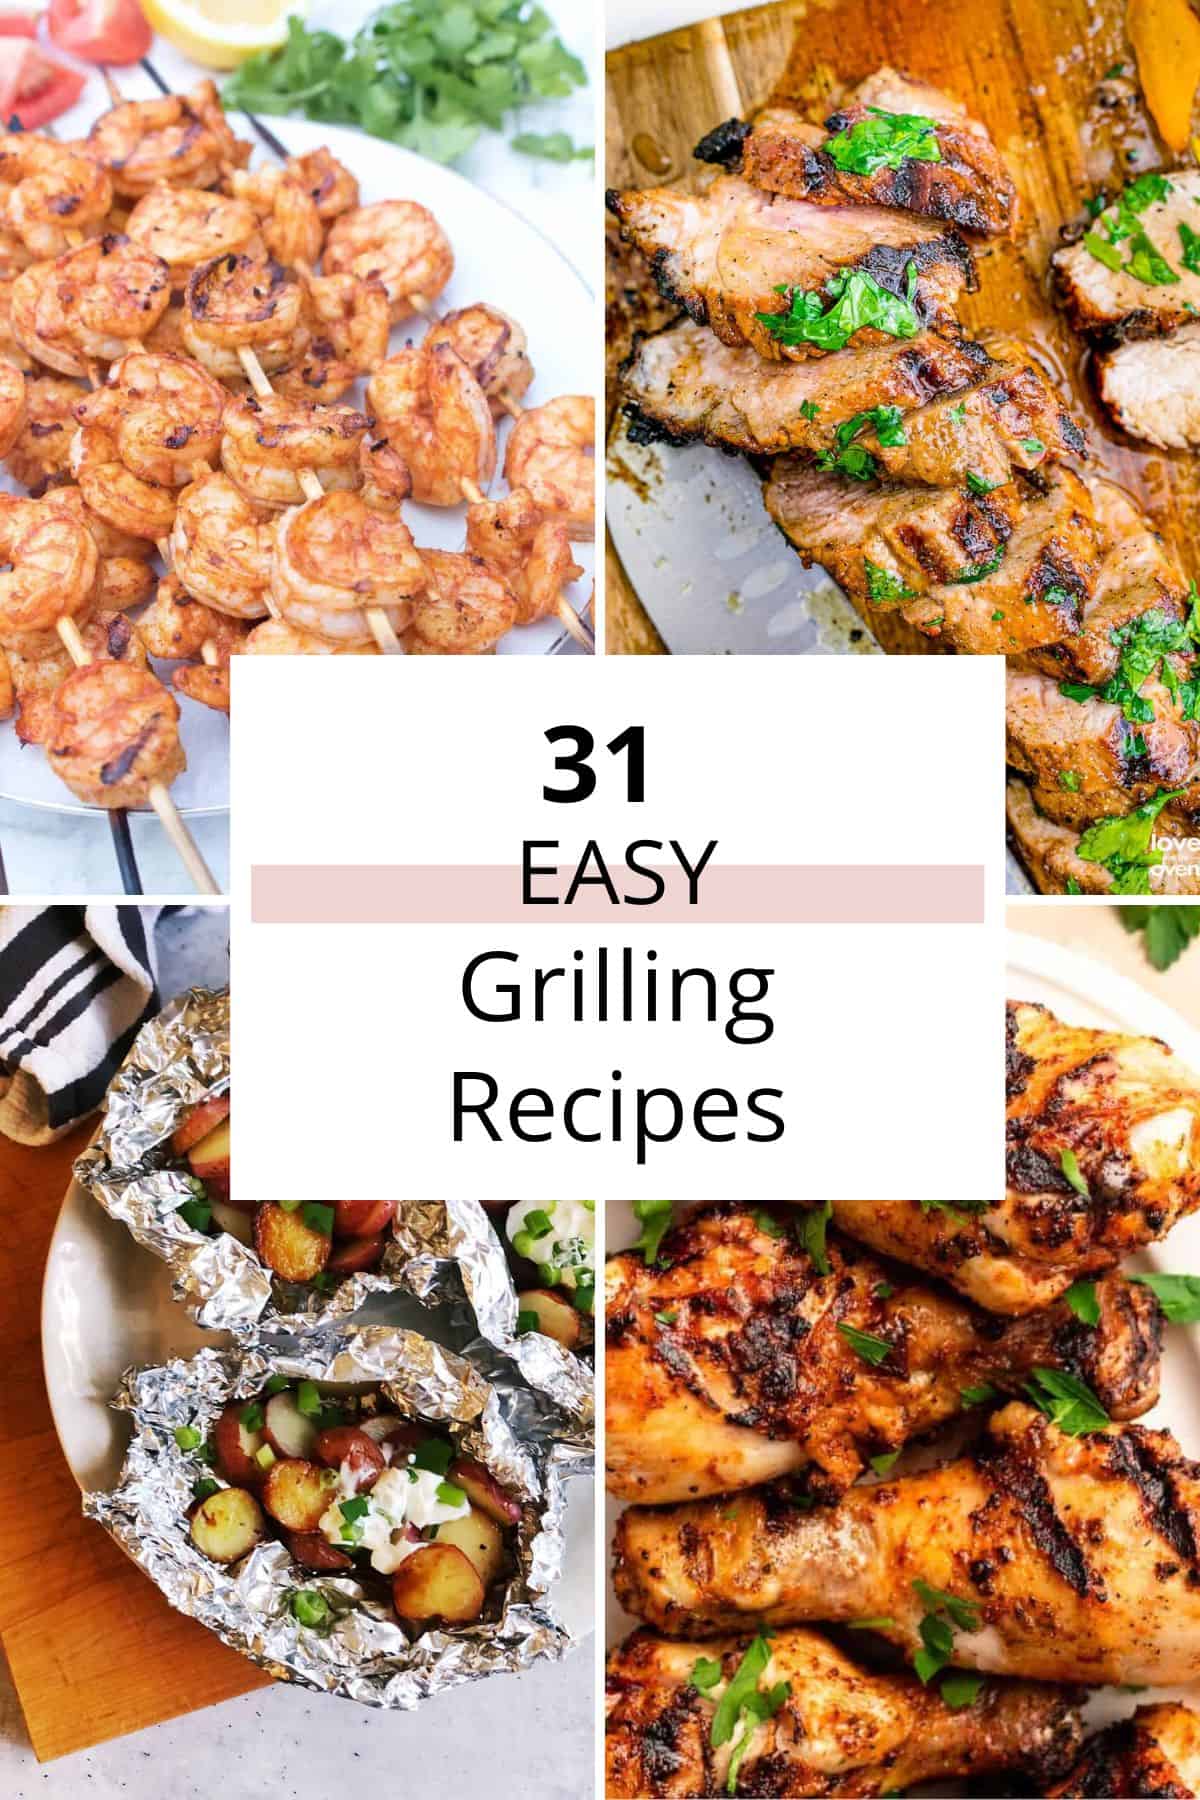 31 Easy Grilling Recipes for Summer